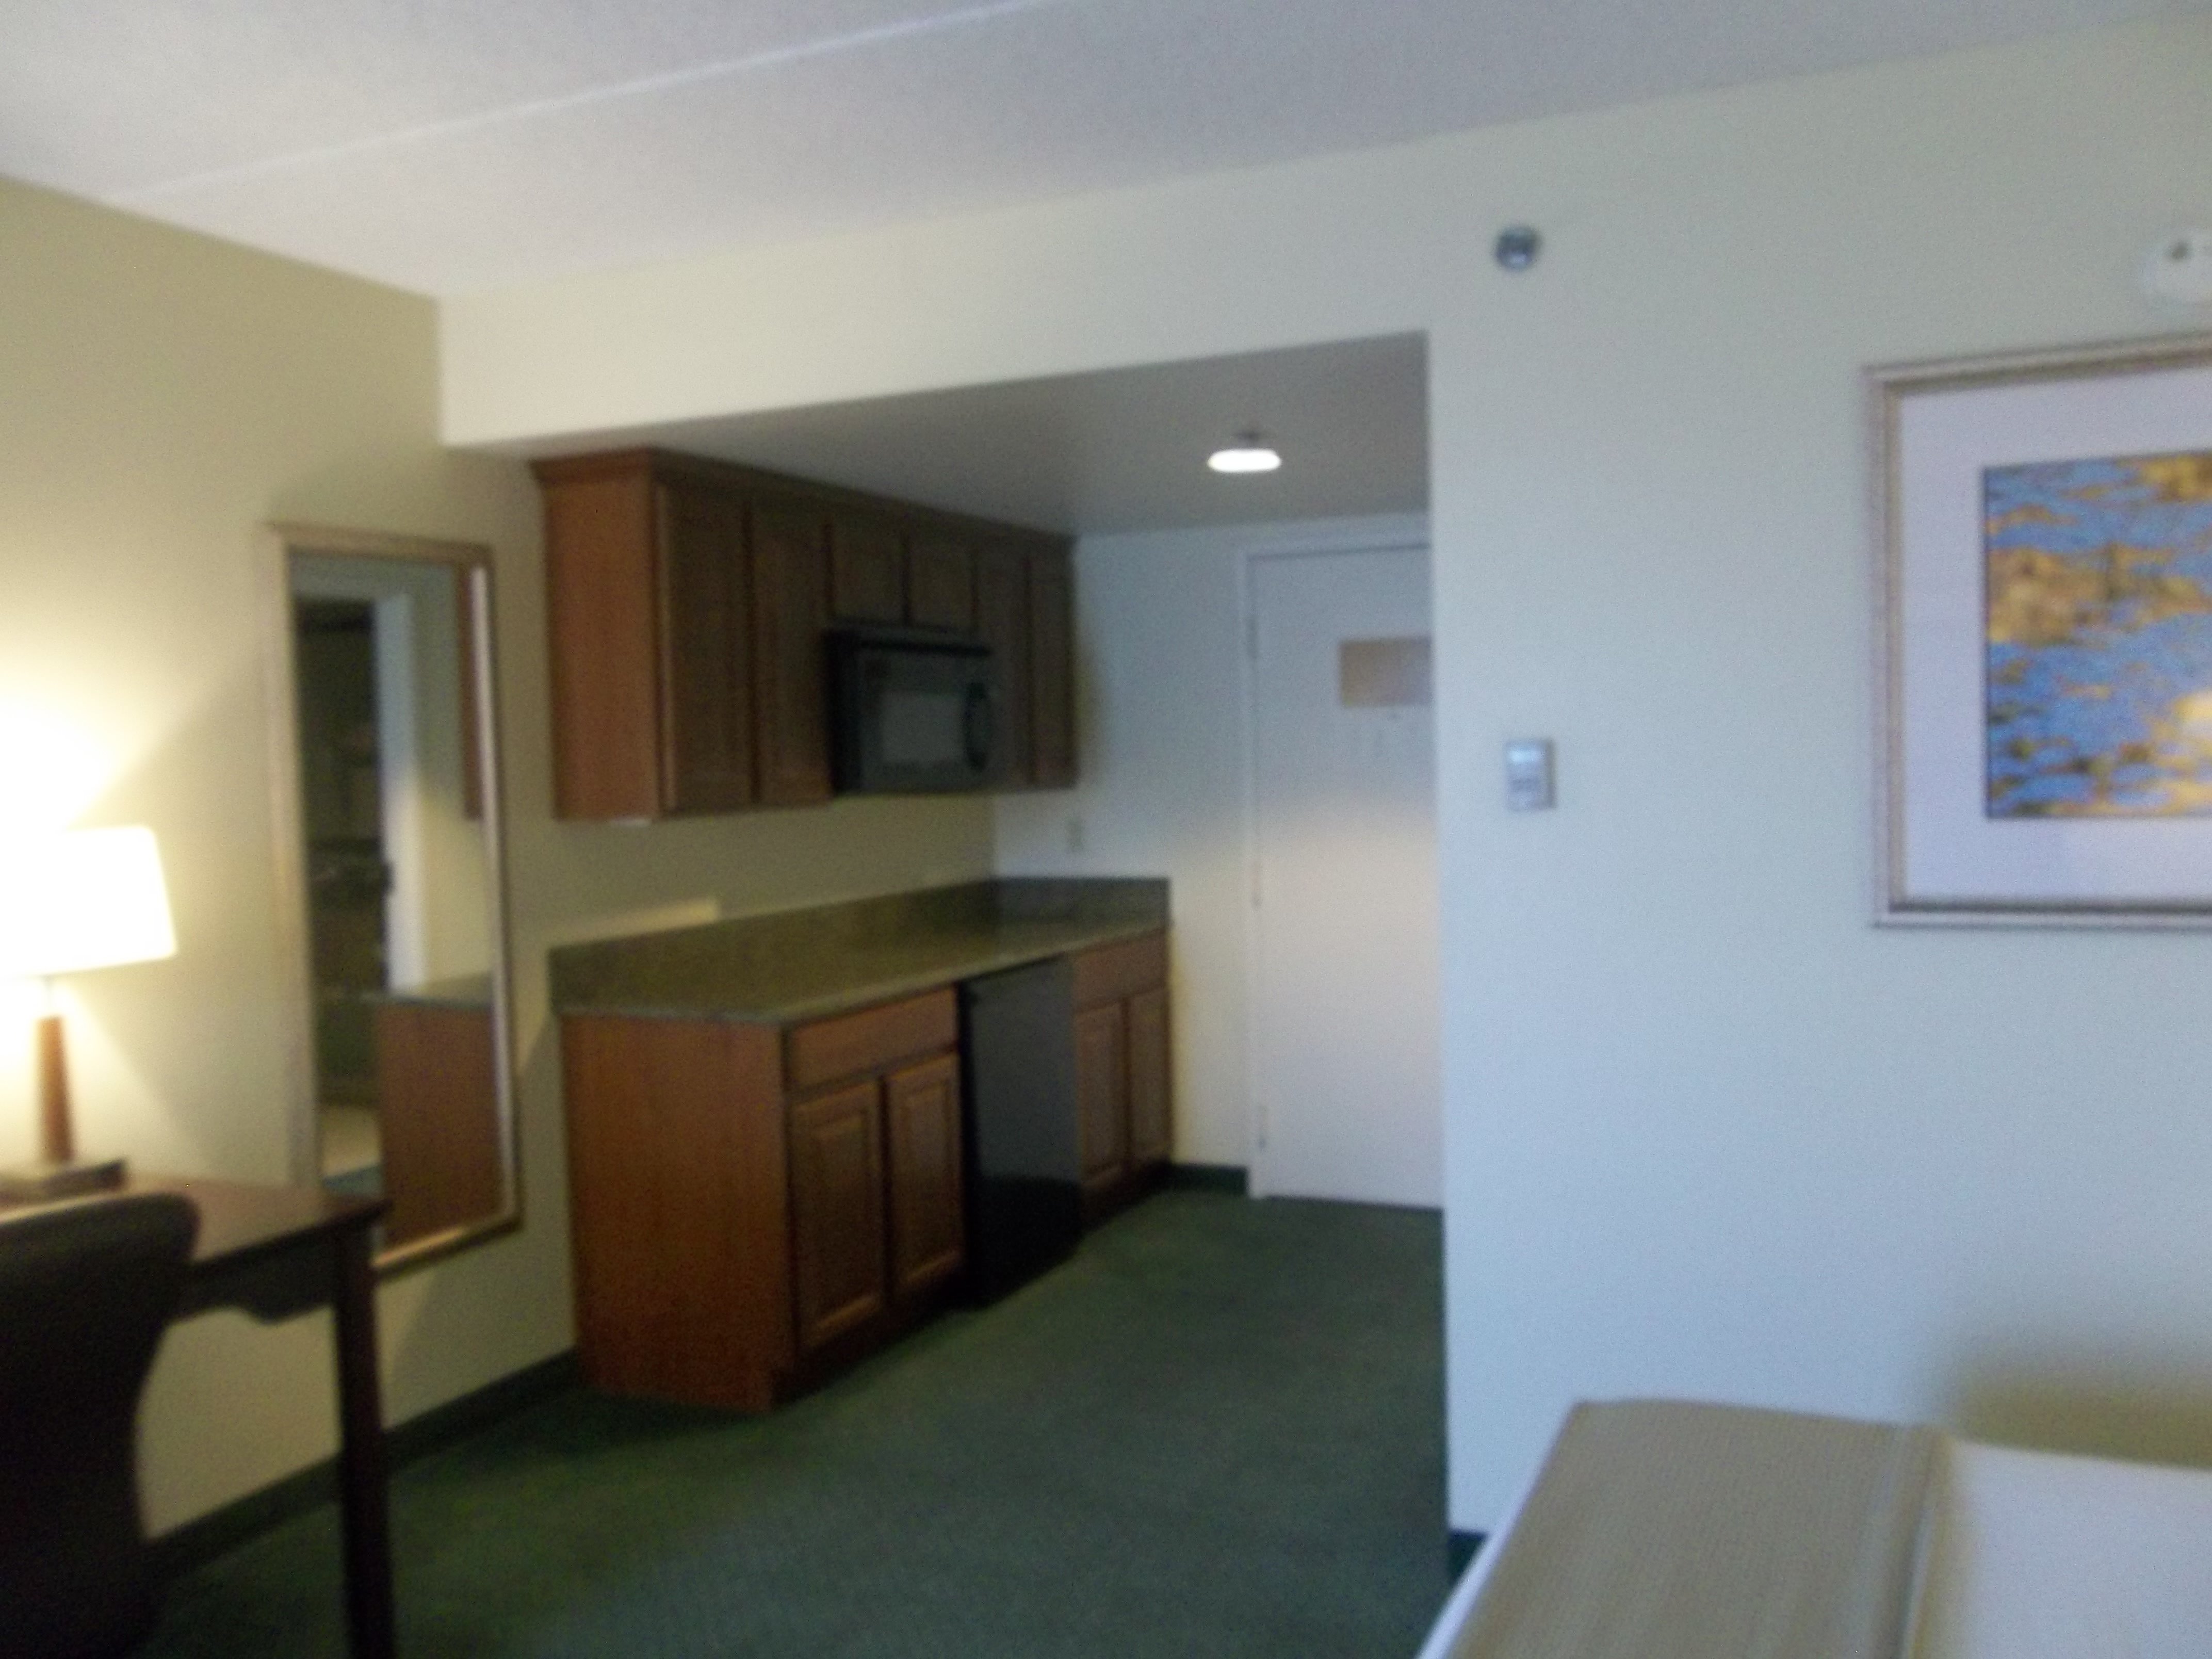 Executive Suite with mini fridge and microwave